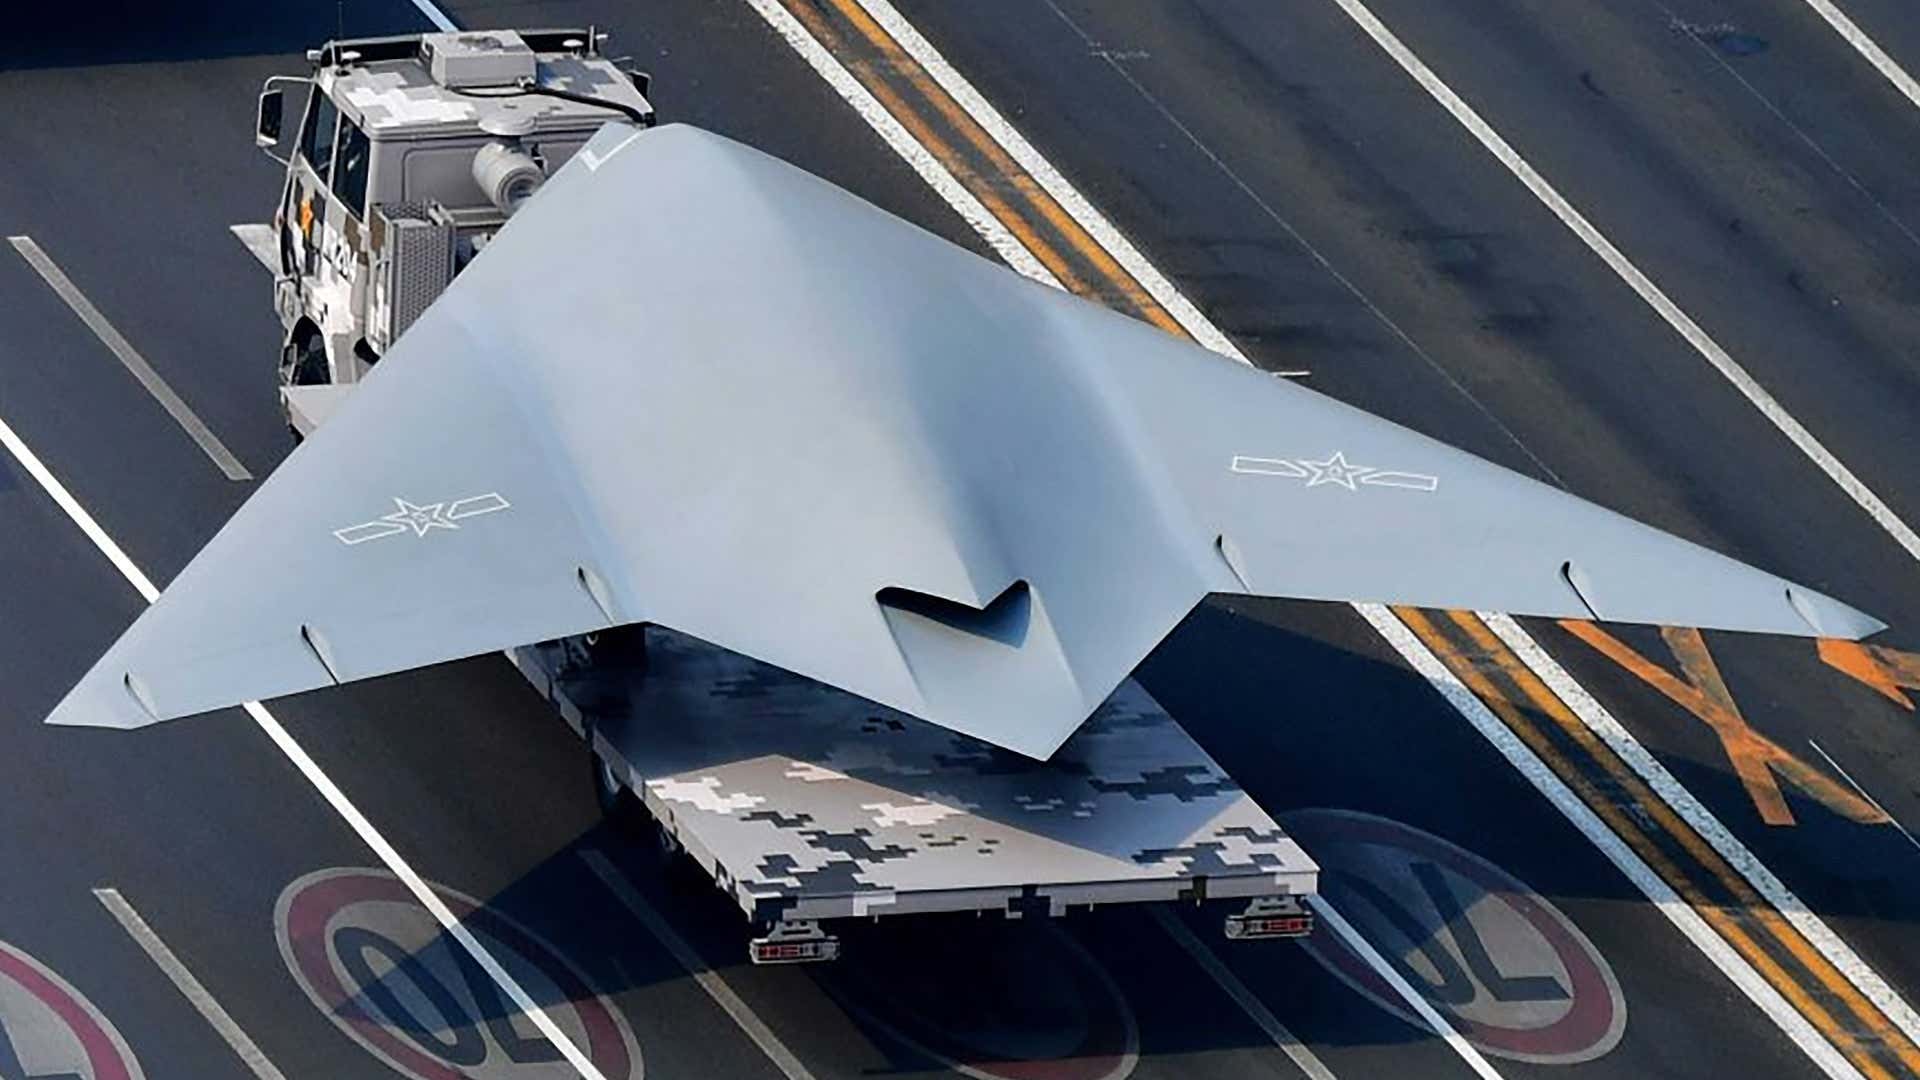 The GJ-11 Sharp Sword stealthy combat drone.